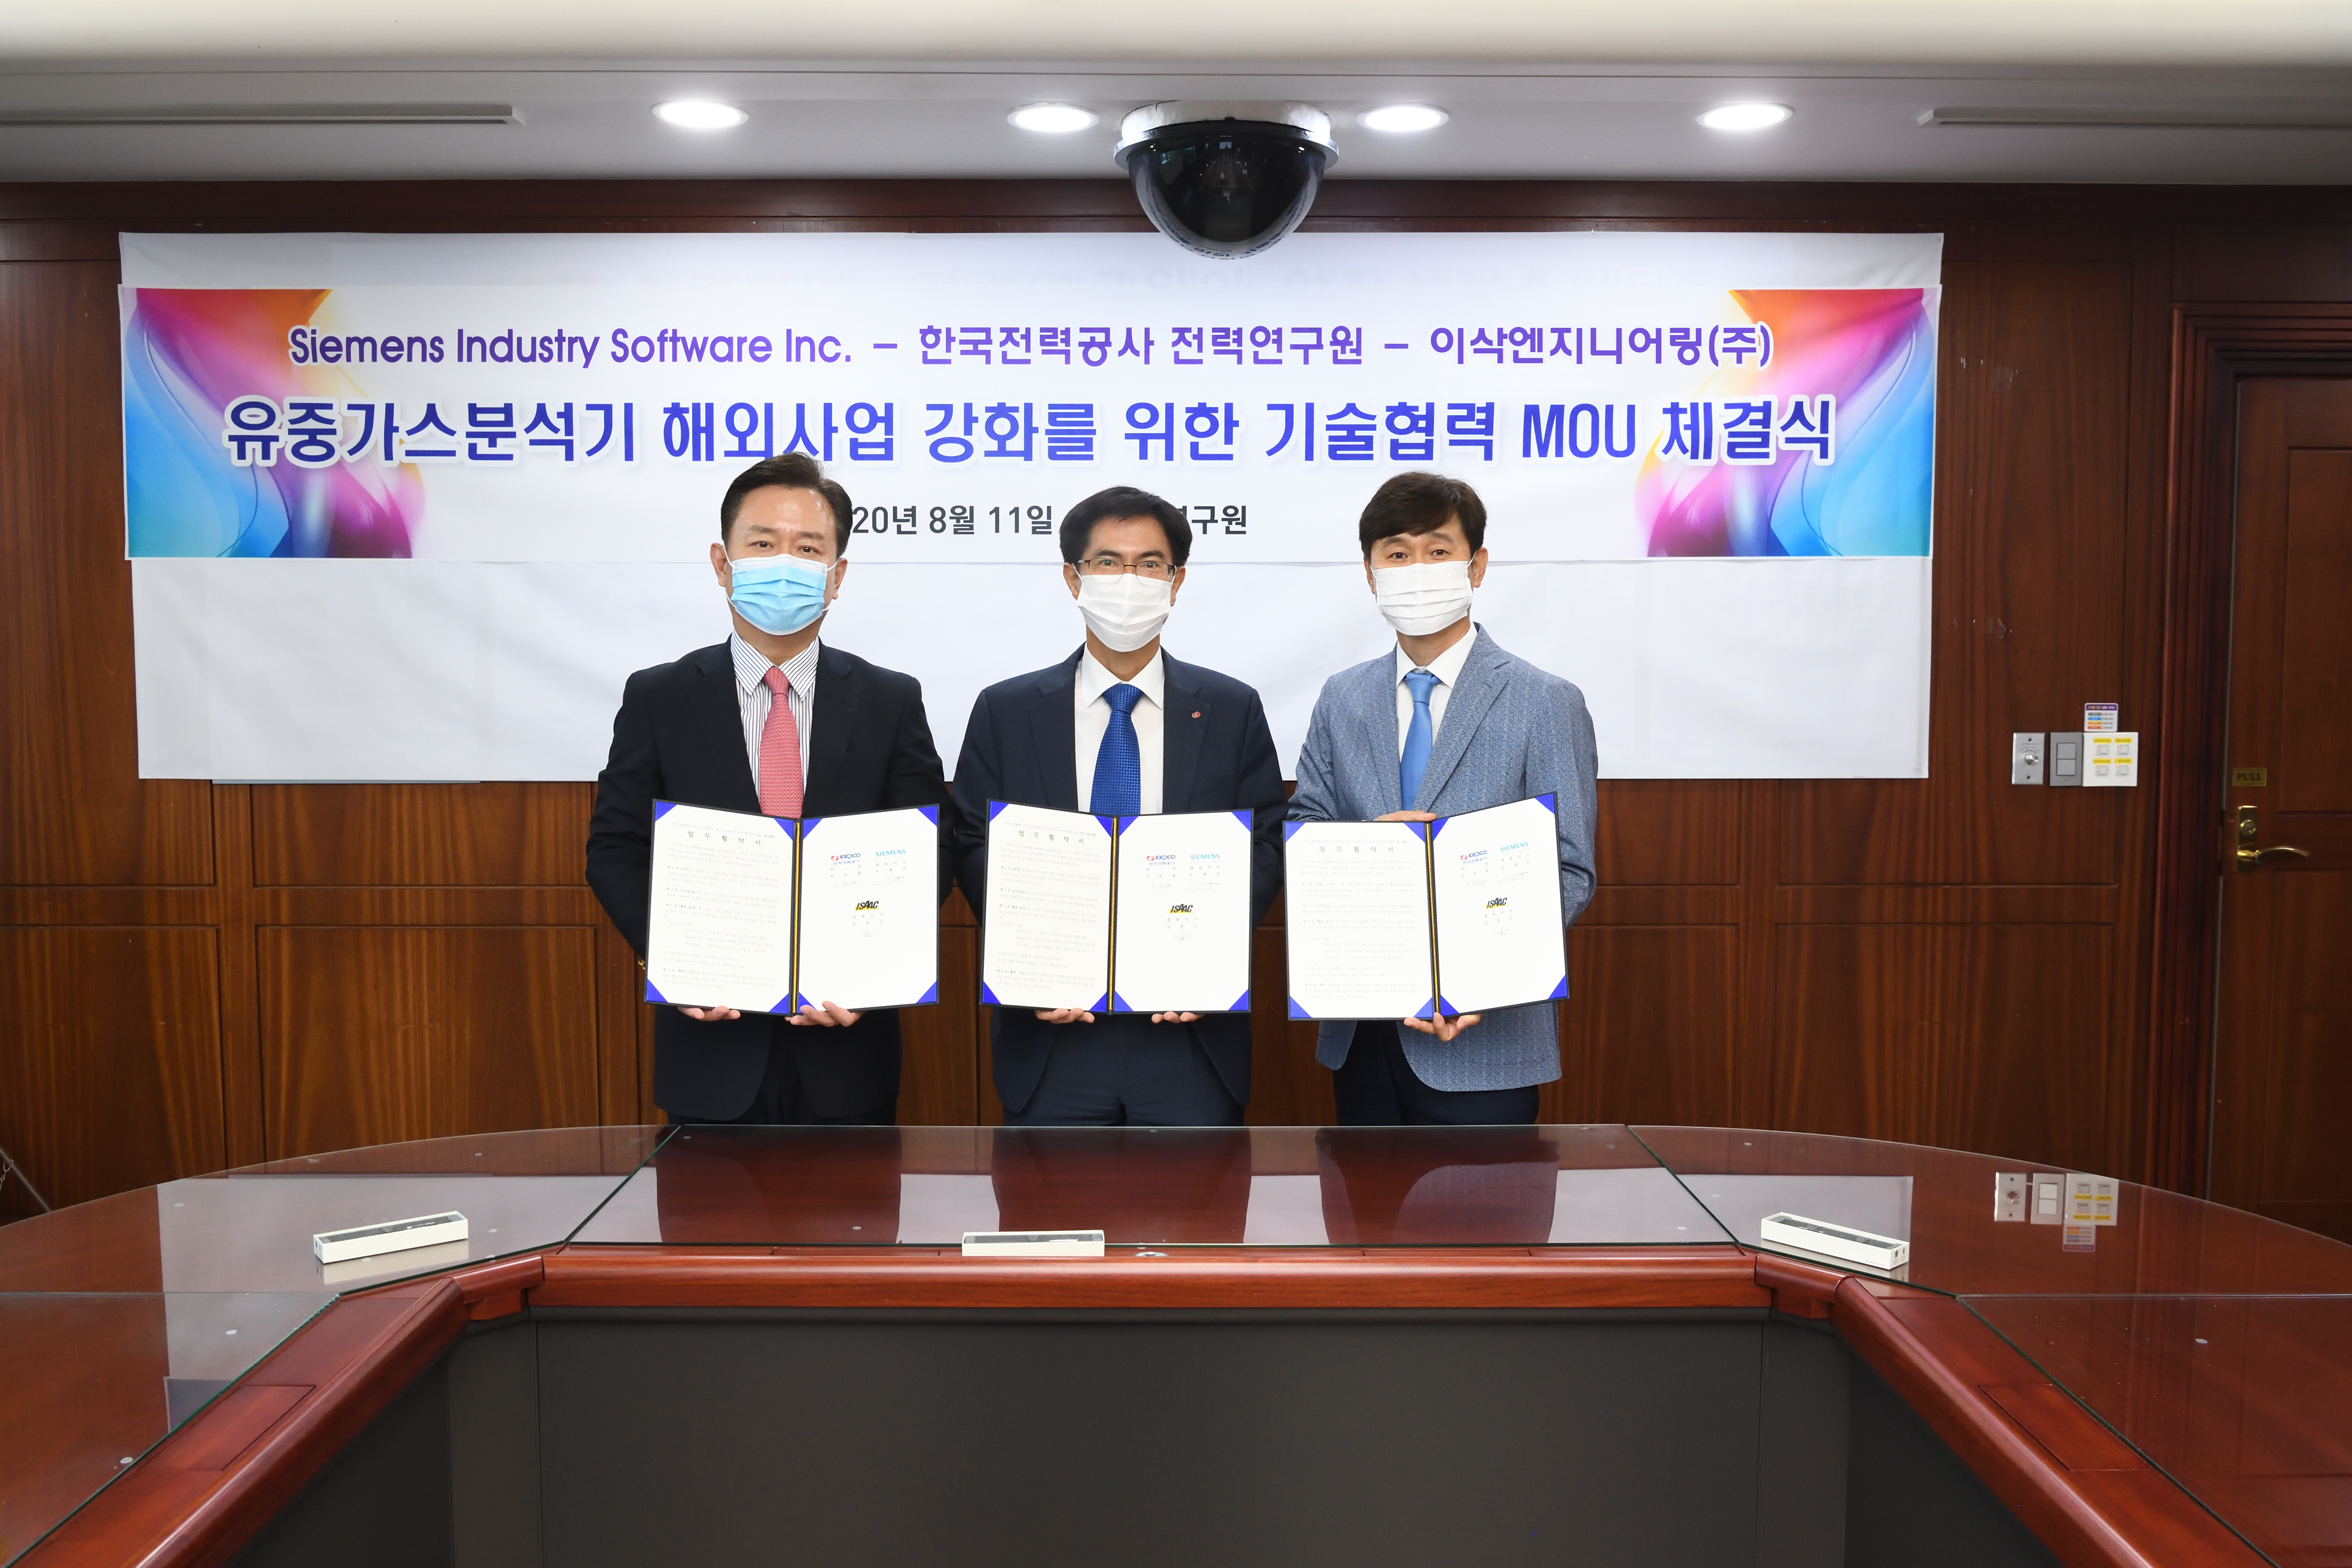 MOU with KEPCO Electric Power Research Institute, Siemens